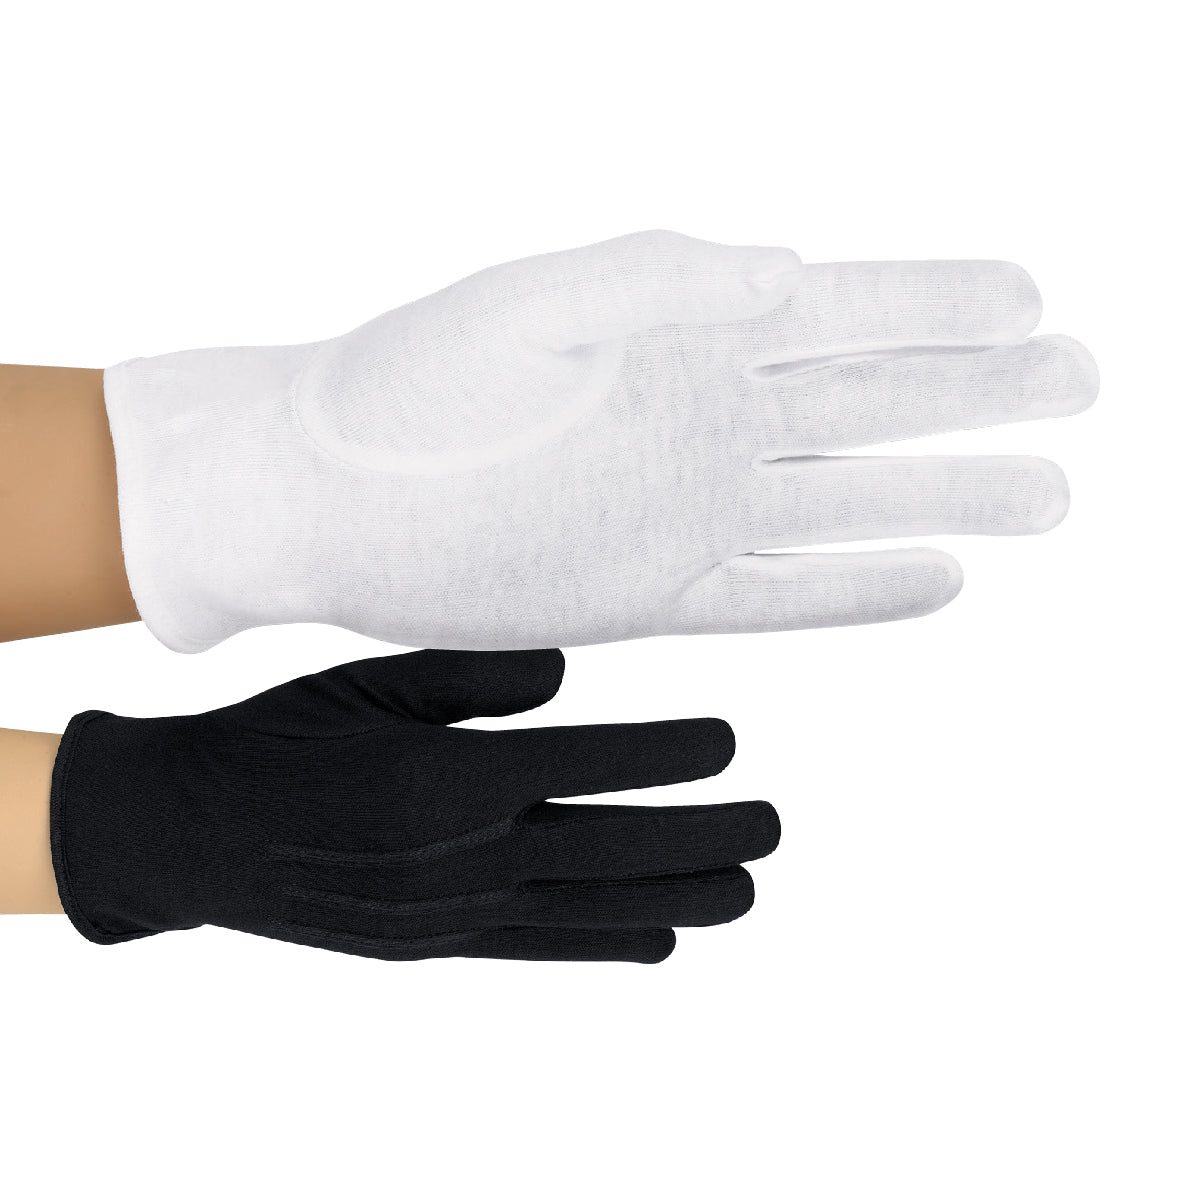 Marching Band Gloves